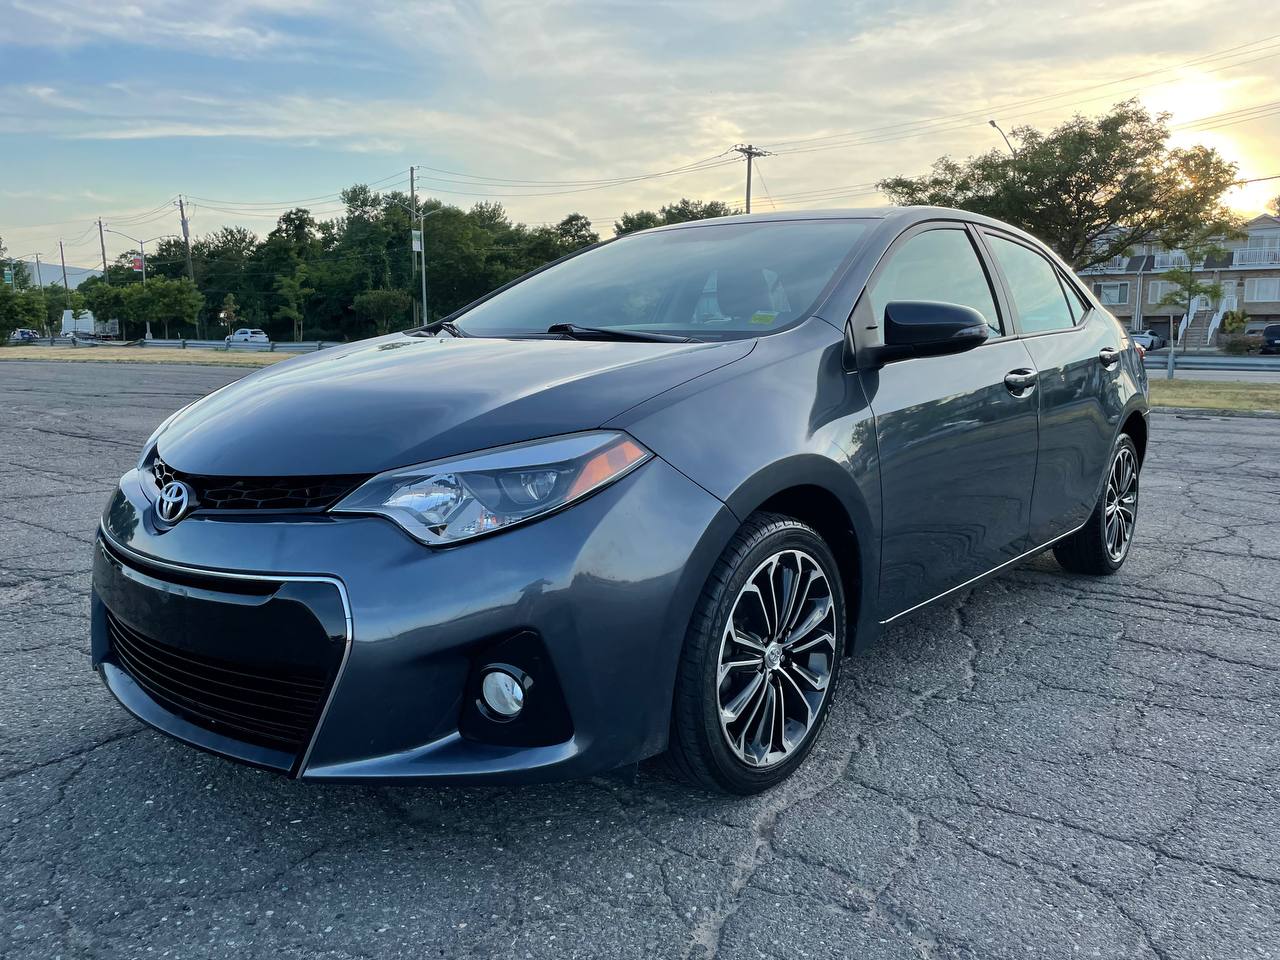 Used Car - 2014 Toyota Corolla S Premium for Sale in Staten Island, NY